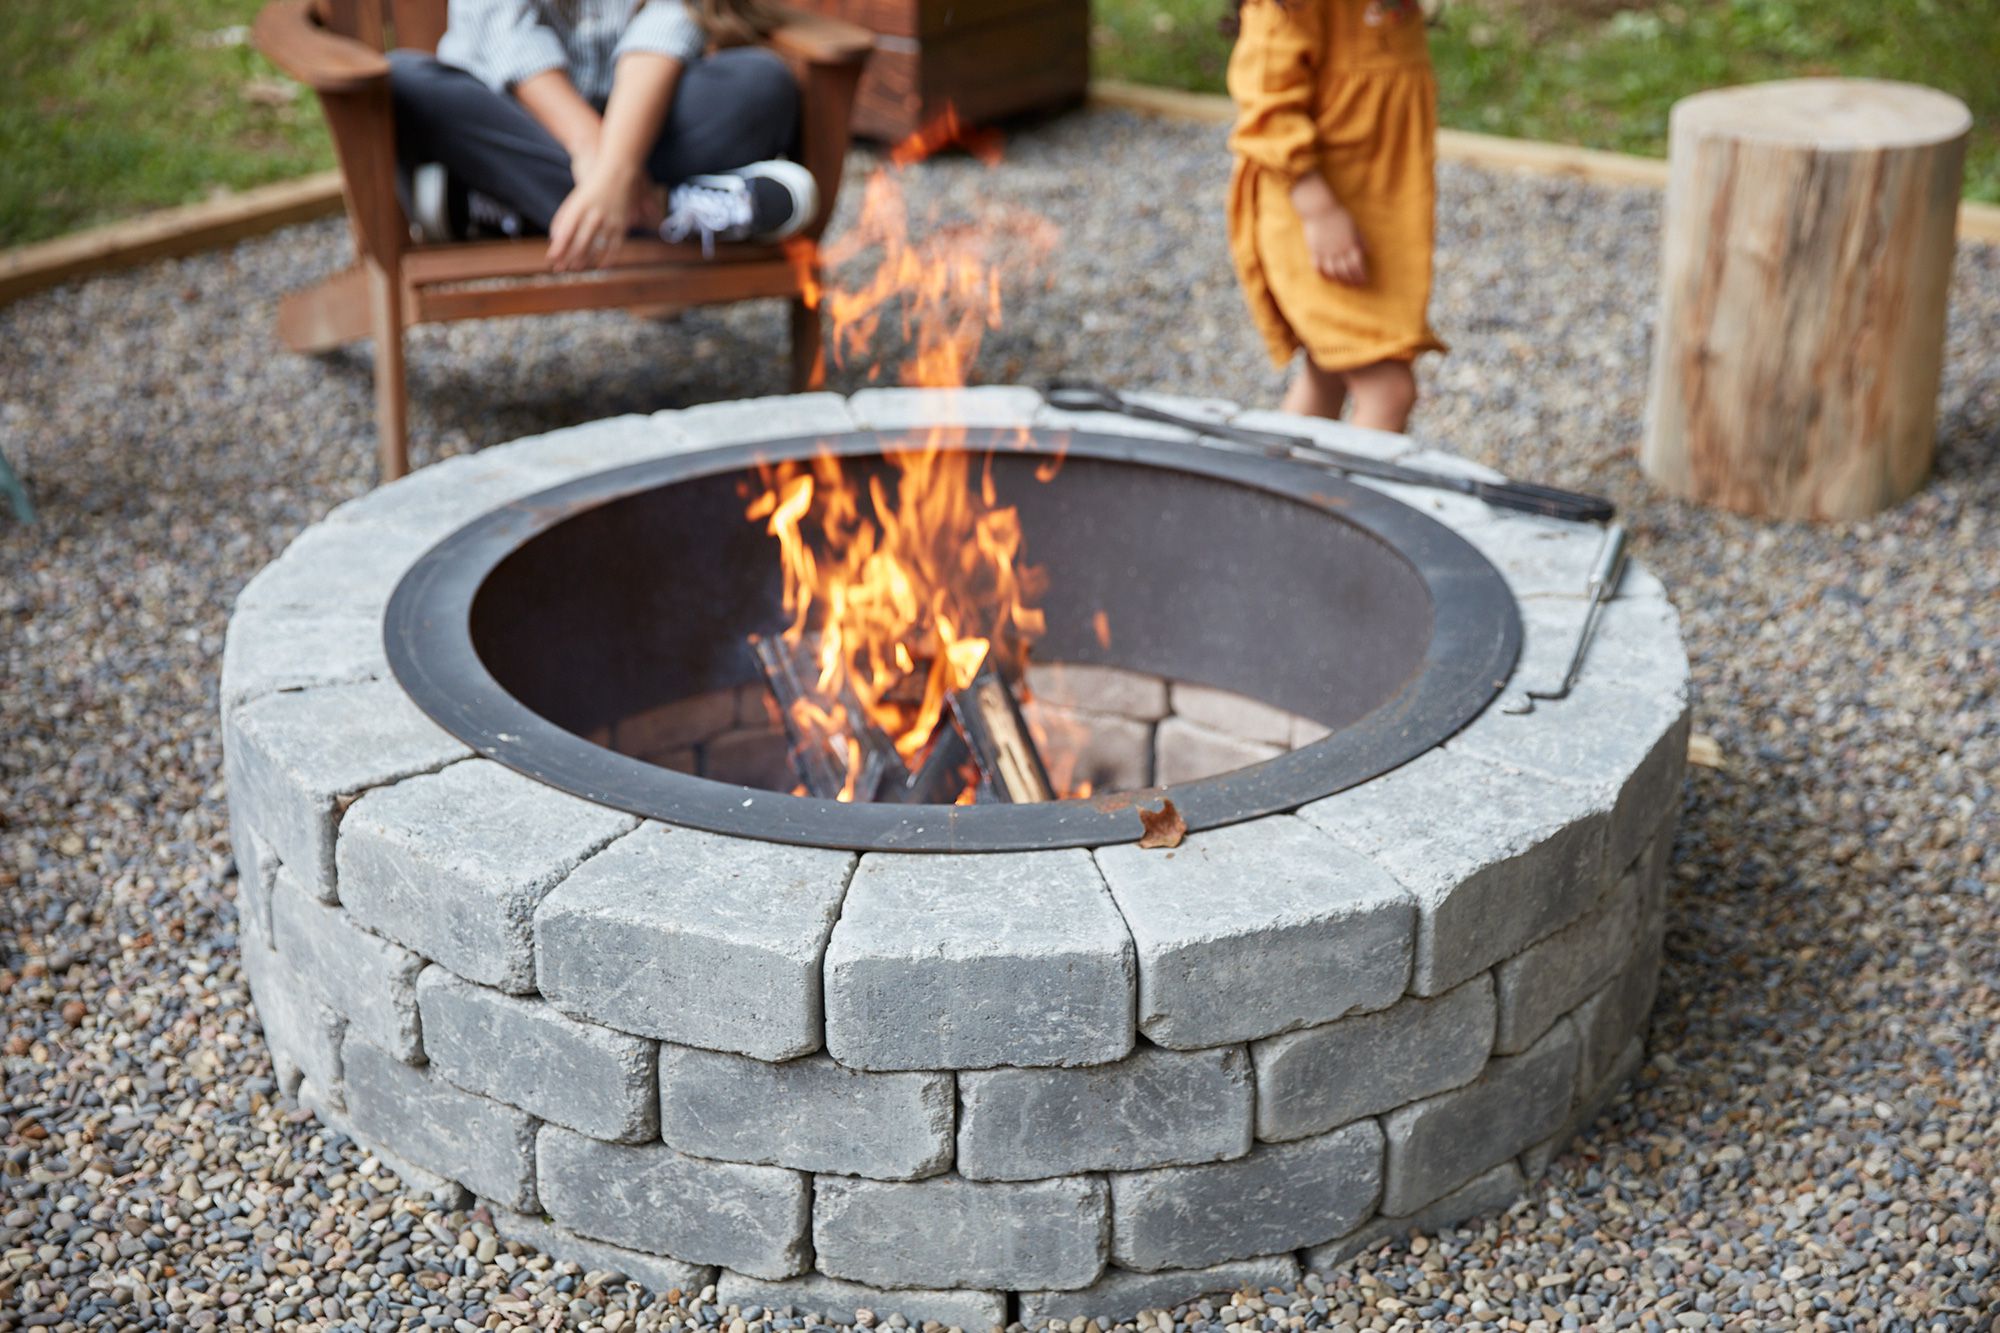 How to Build a Firepit in Your Backyard